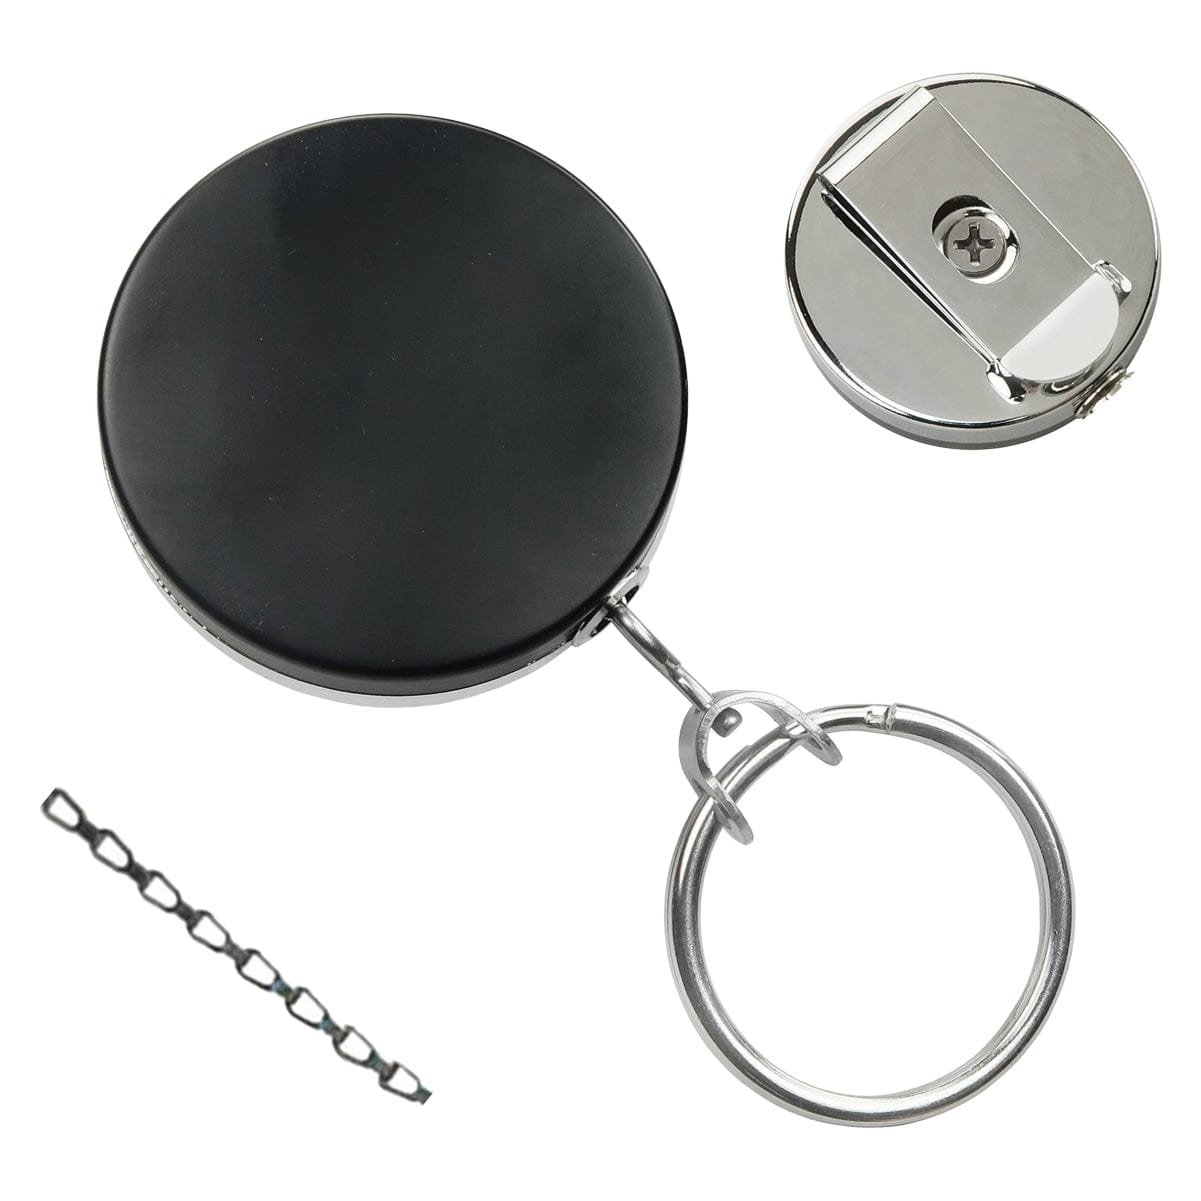 The Heavy Duty Badge Reel with Chain & Belt Clip - Strong All Metal Retractable Keychain for Keys and Badges (2120-3325) in sleek black features a retractable keychain with an attached keyring. The image also showcases a separate metal clip and a short chain, highlighting its versatile design. Additionally, the included belt clip ensures easy and secure attachment.